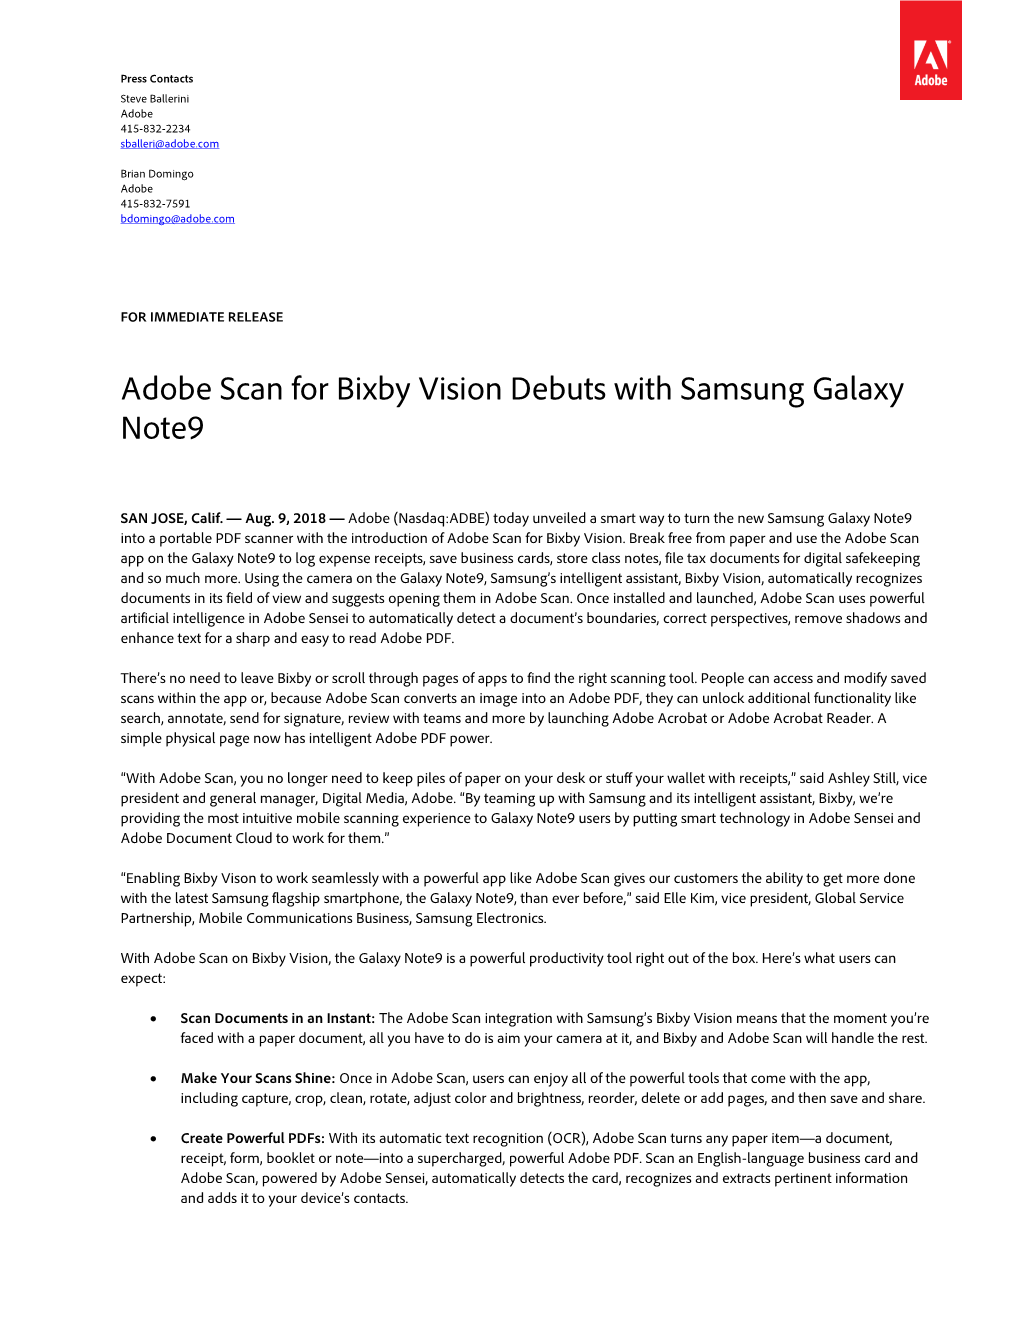 Adobe Scan for Bixby Vision Debuts with Samsung Galaxy Note9